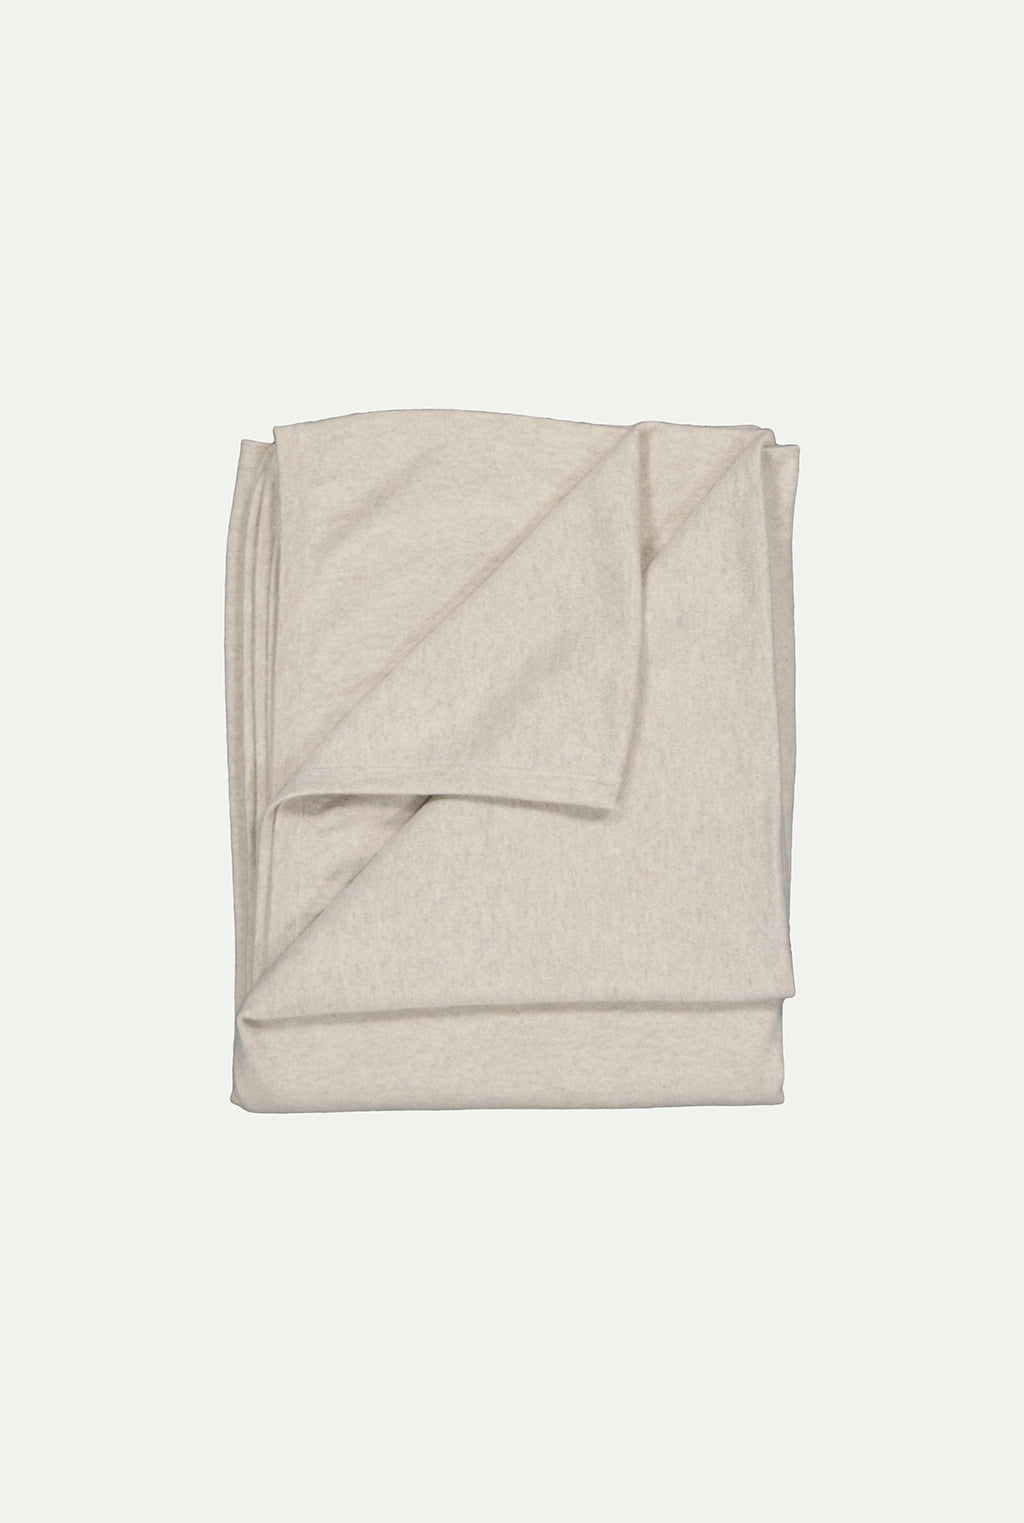 The organic cashmere BLANKET